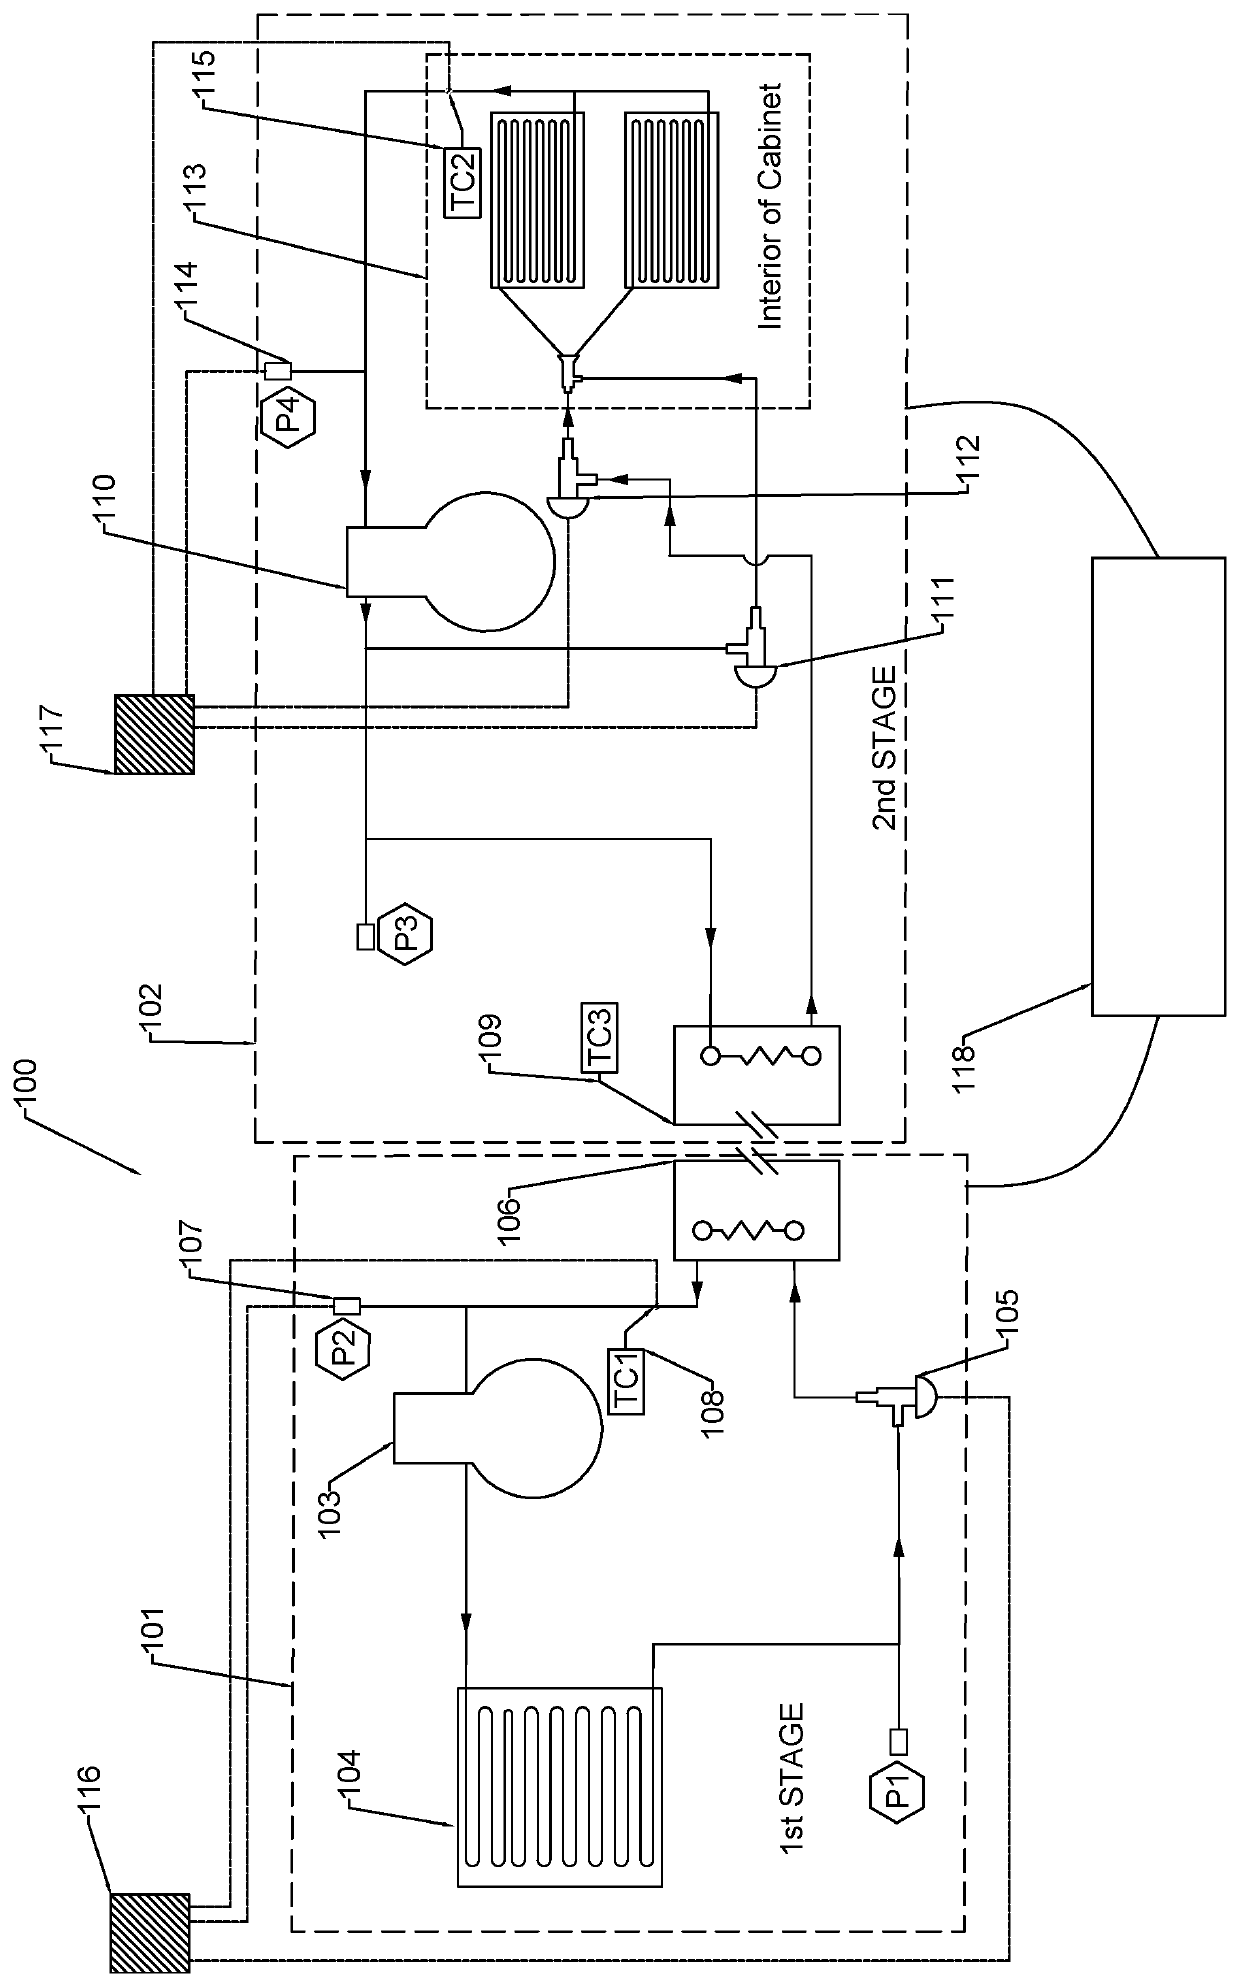 System and method of hot gas defrost control for multistage cascade refrigeration system